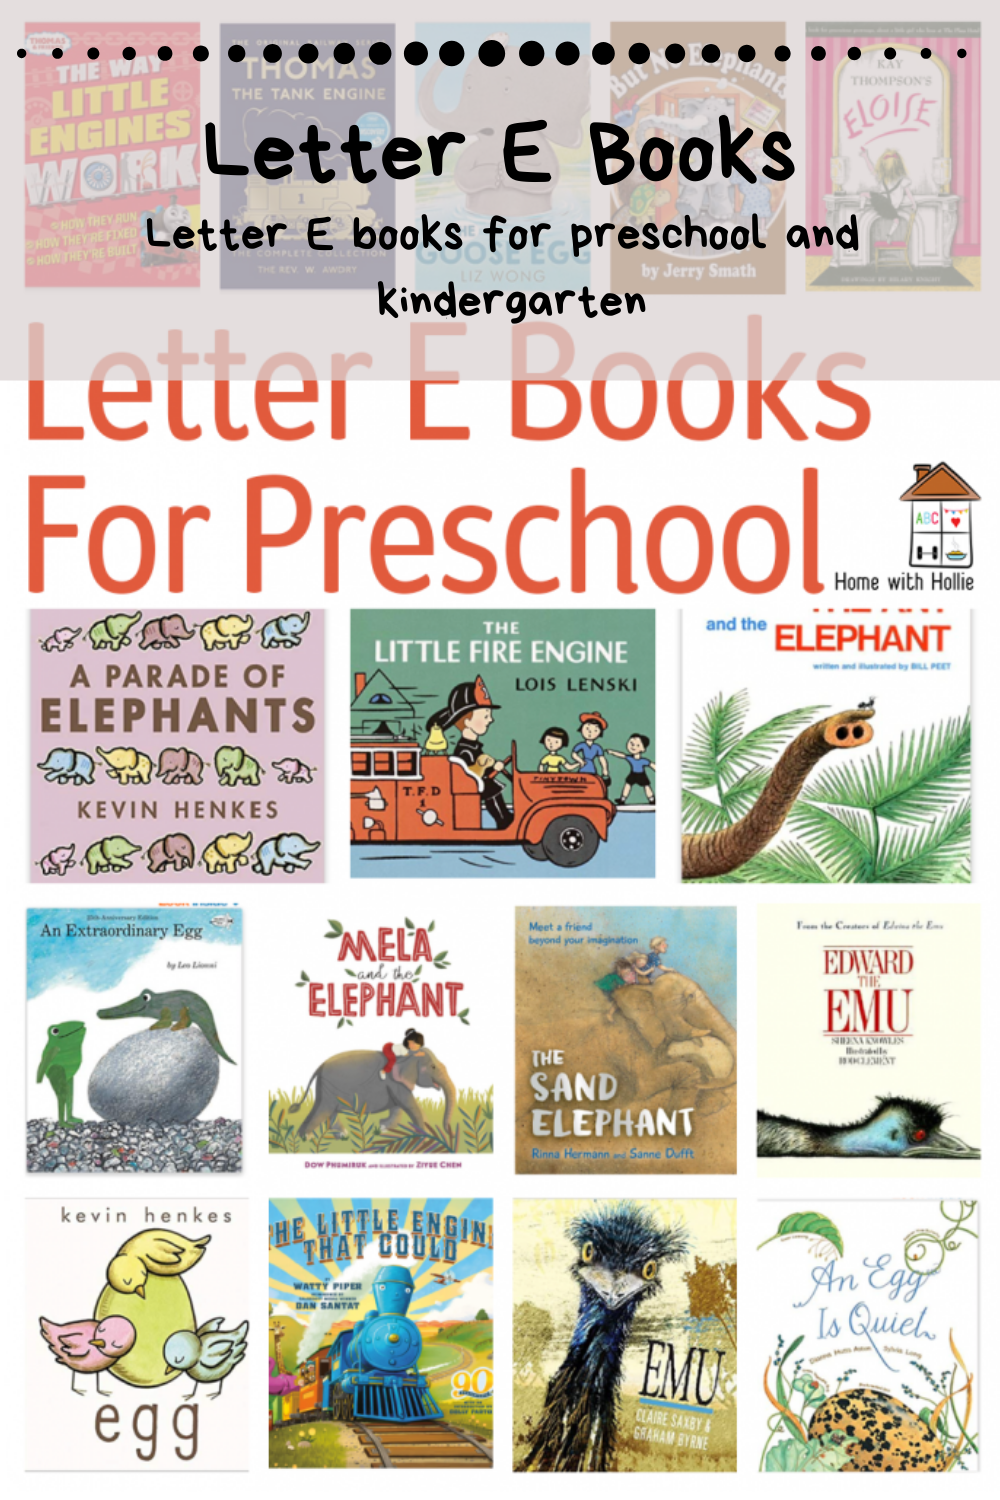 Letter E Books for Preschool Book List - Home With Hollie